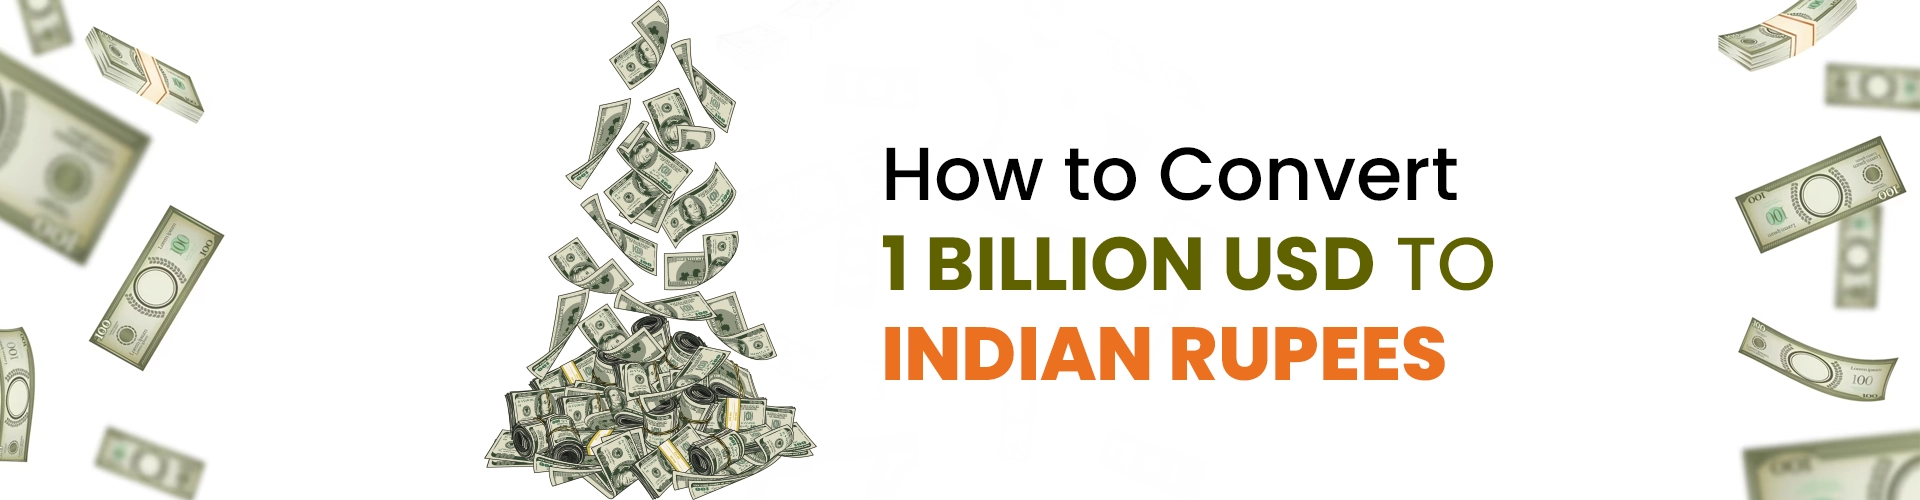 Convert 1 Billion USD To Indian Rupees